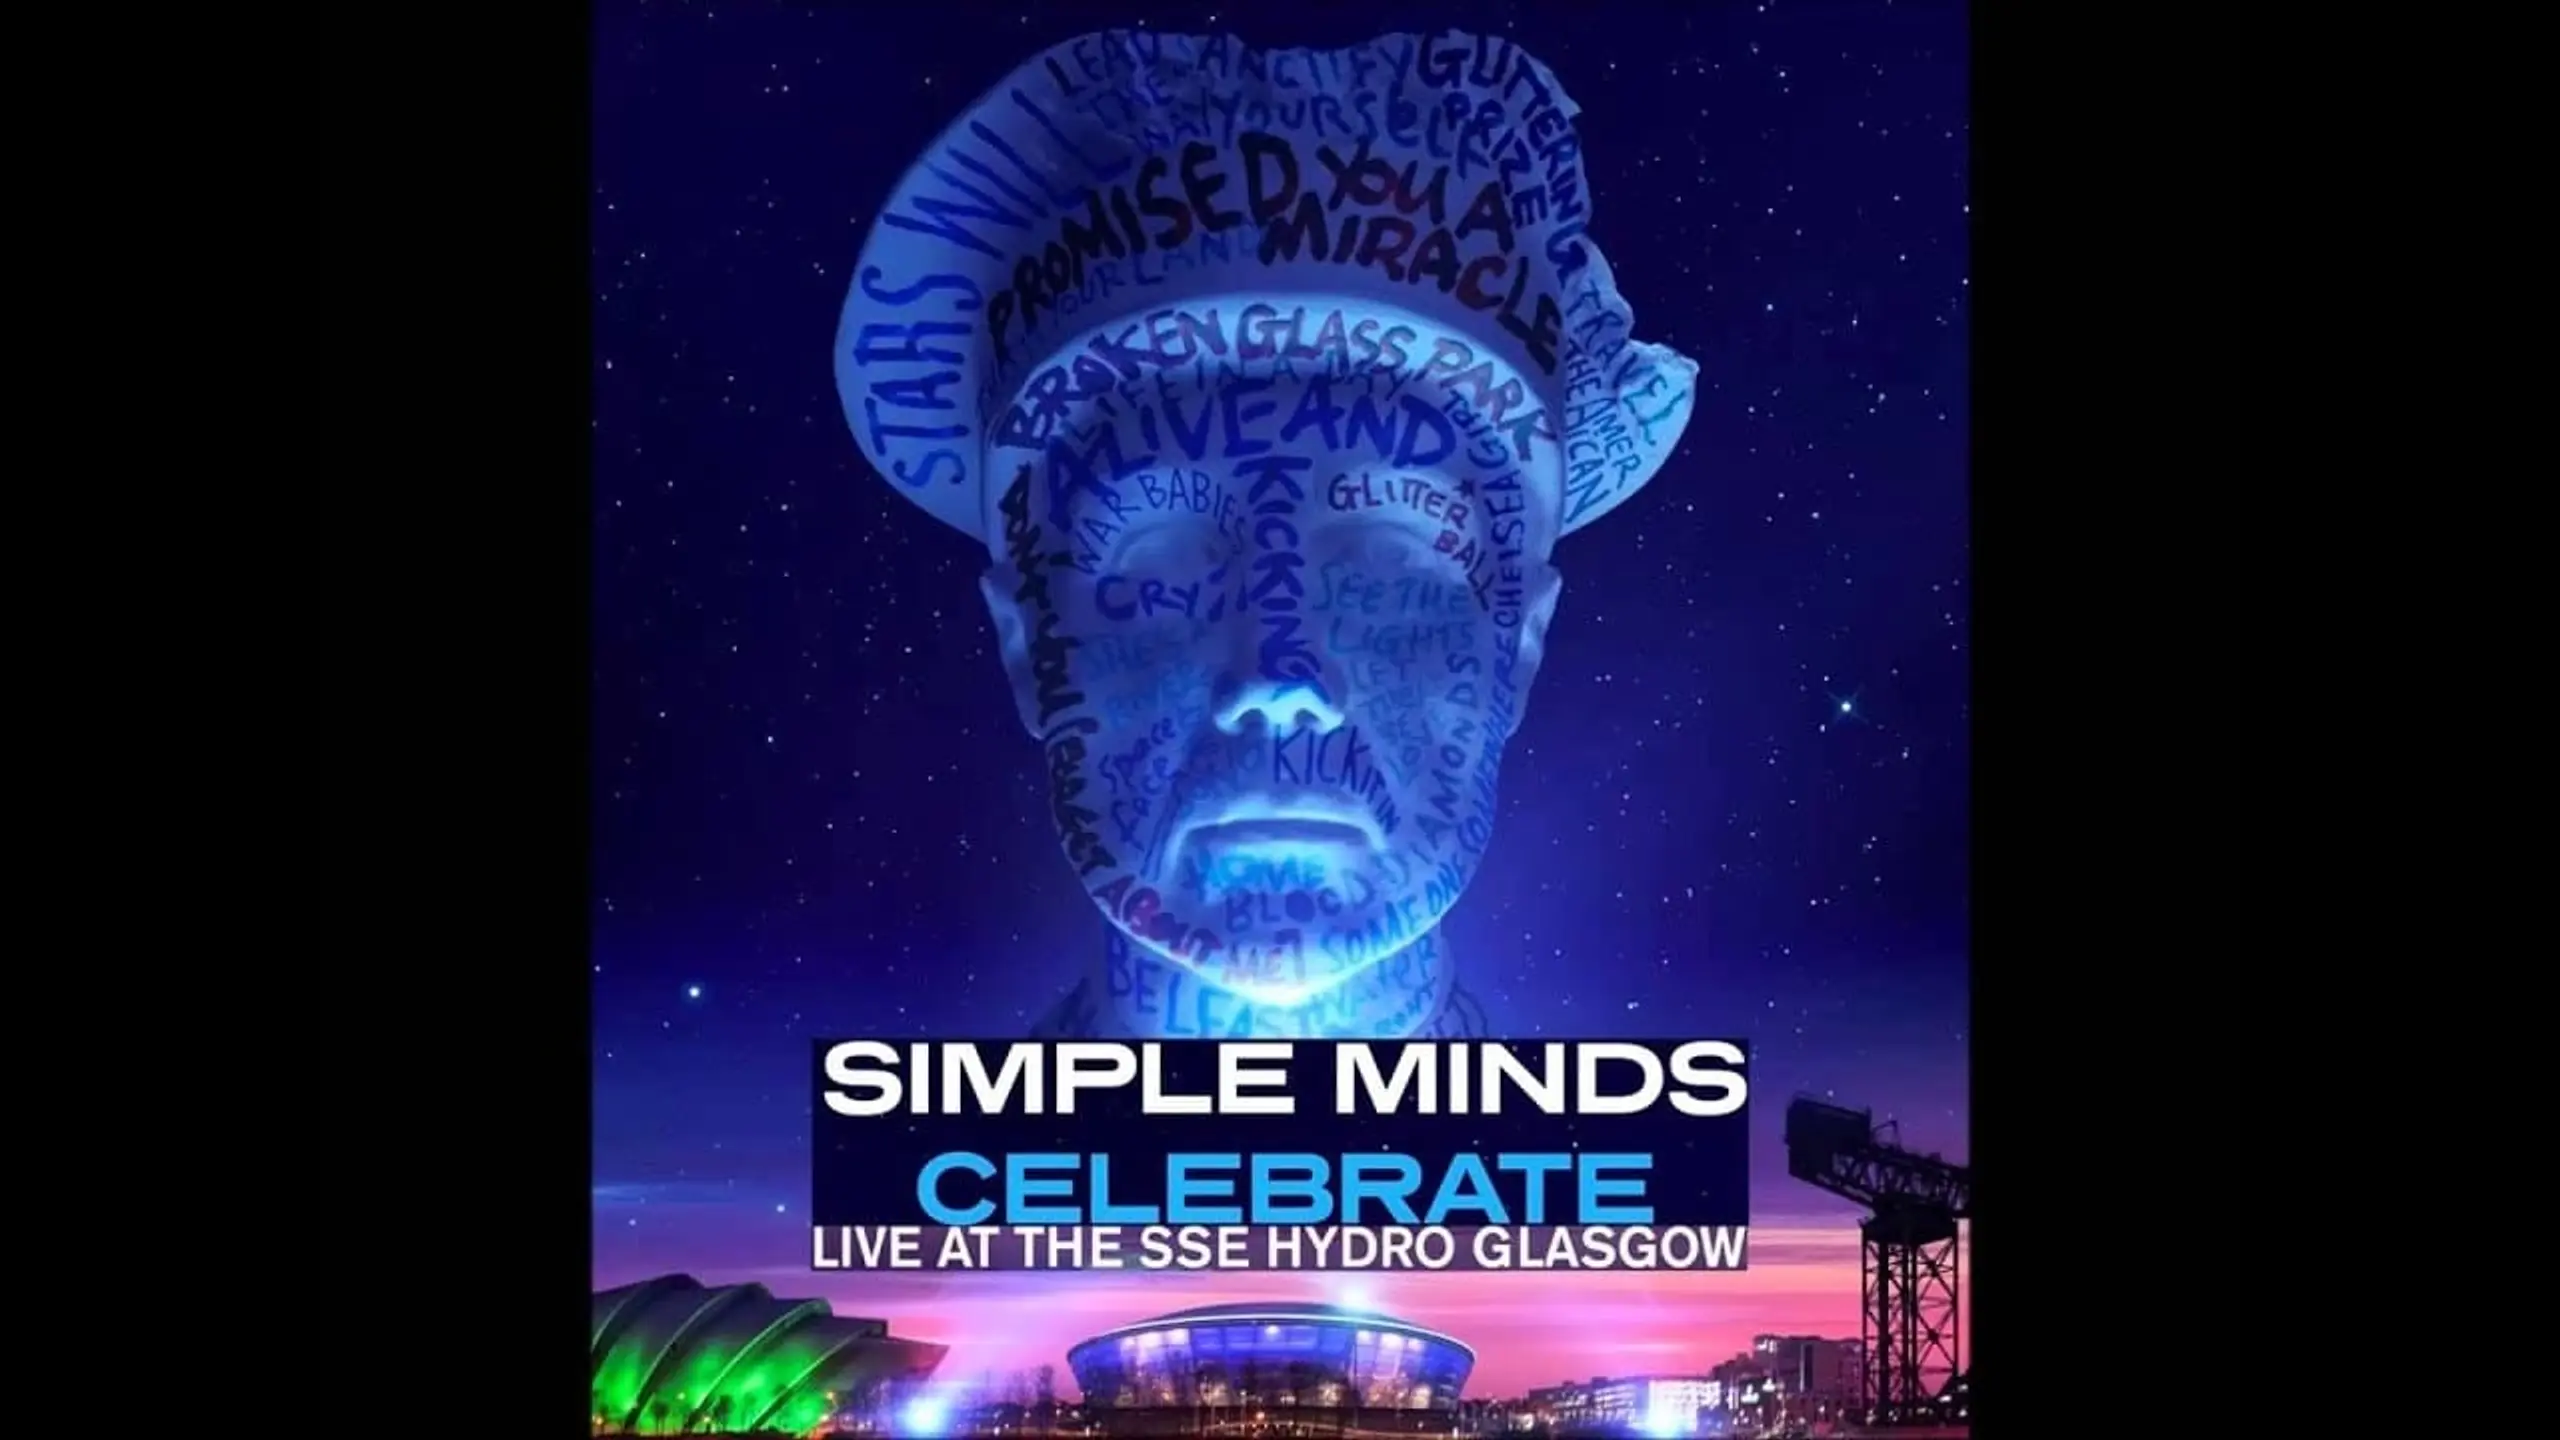 Simple Minds - Celebrate (Live at the SSE Hydro Glasgow)